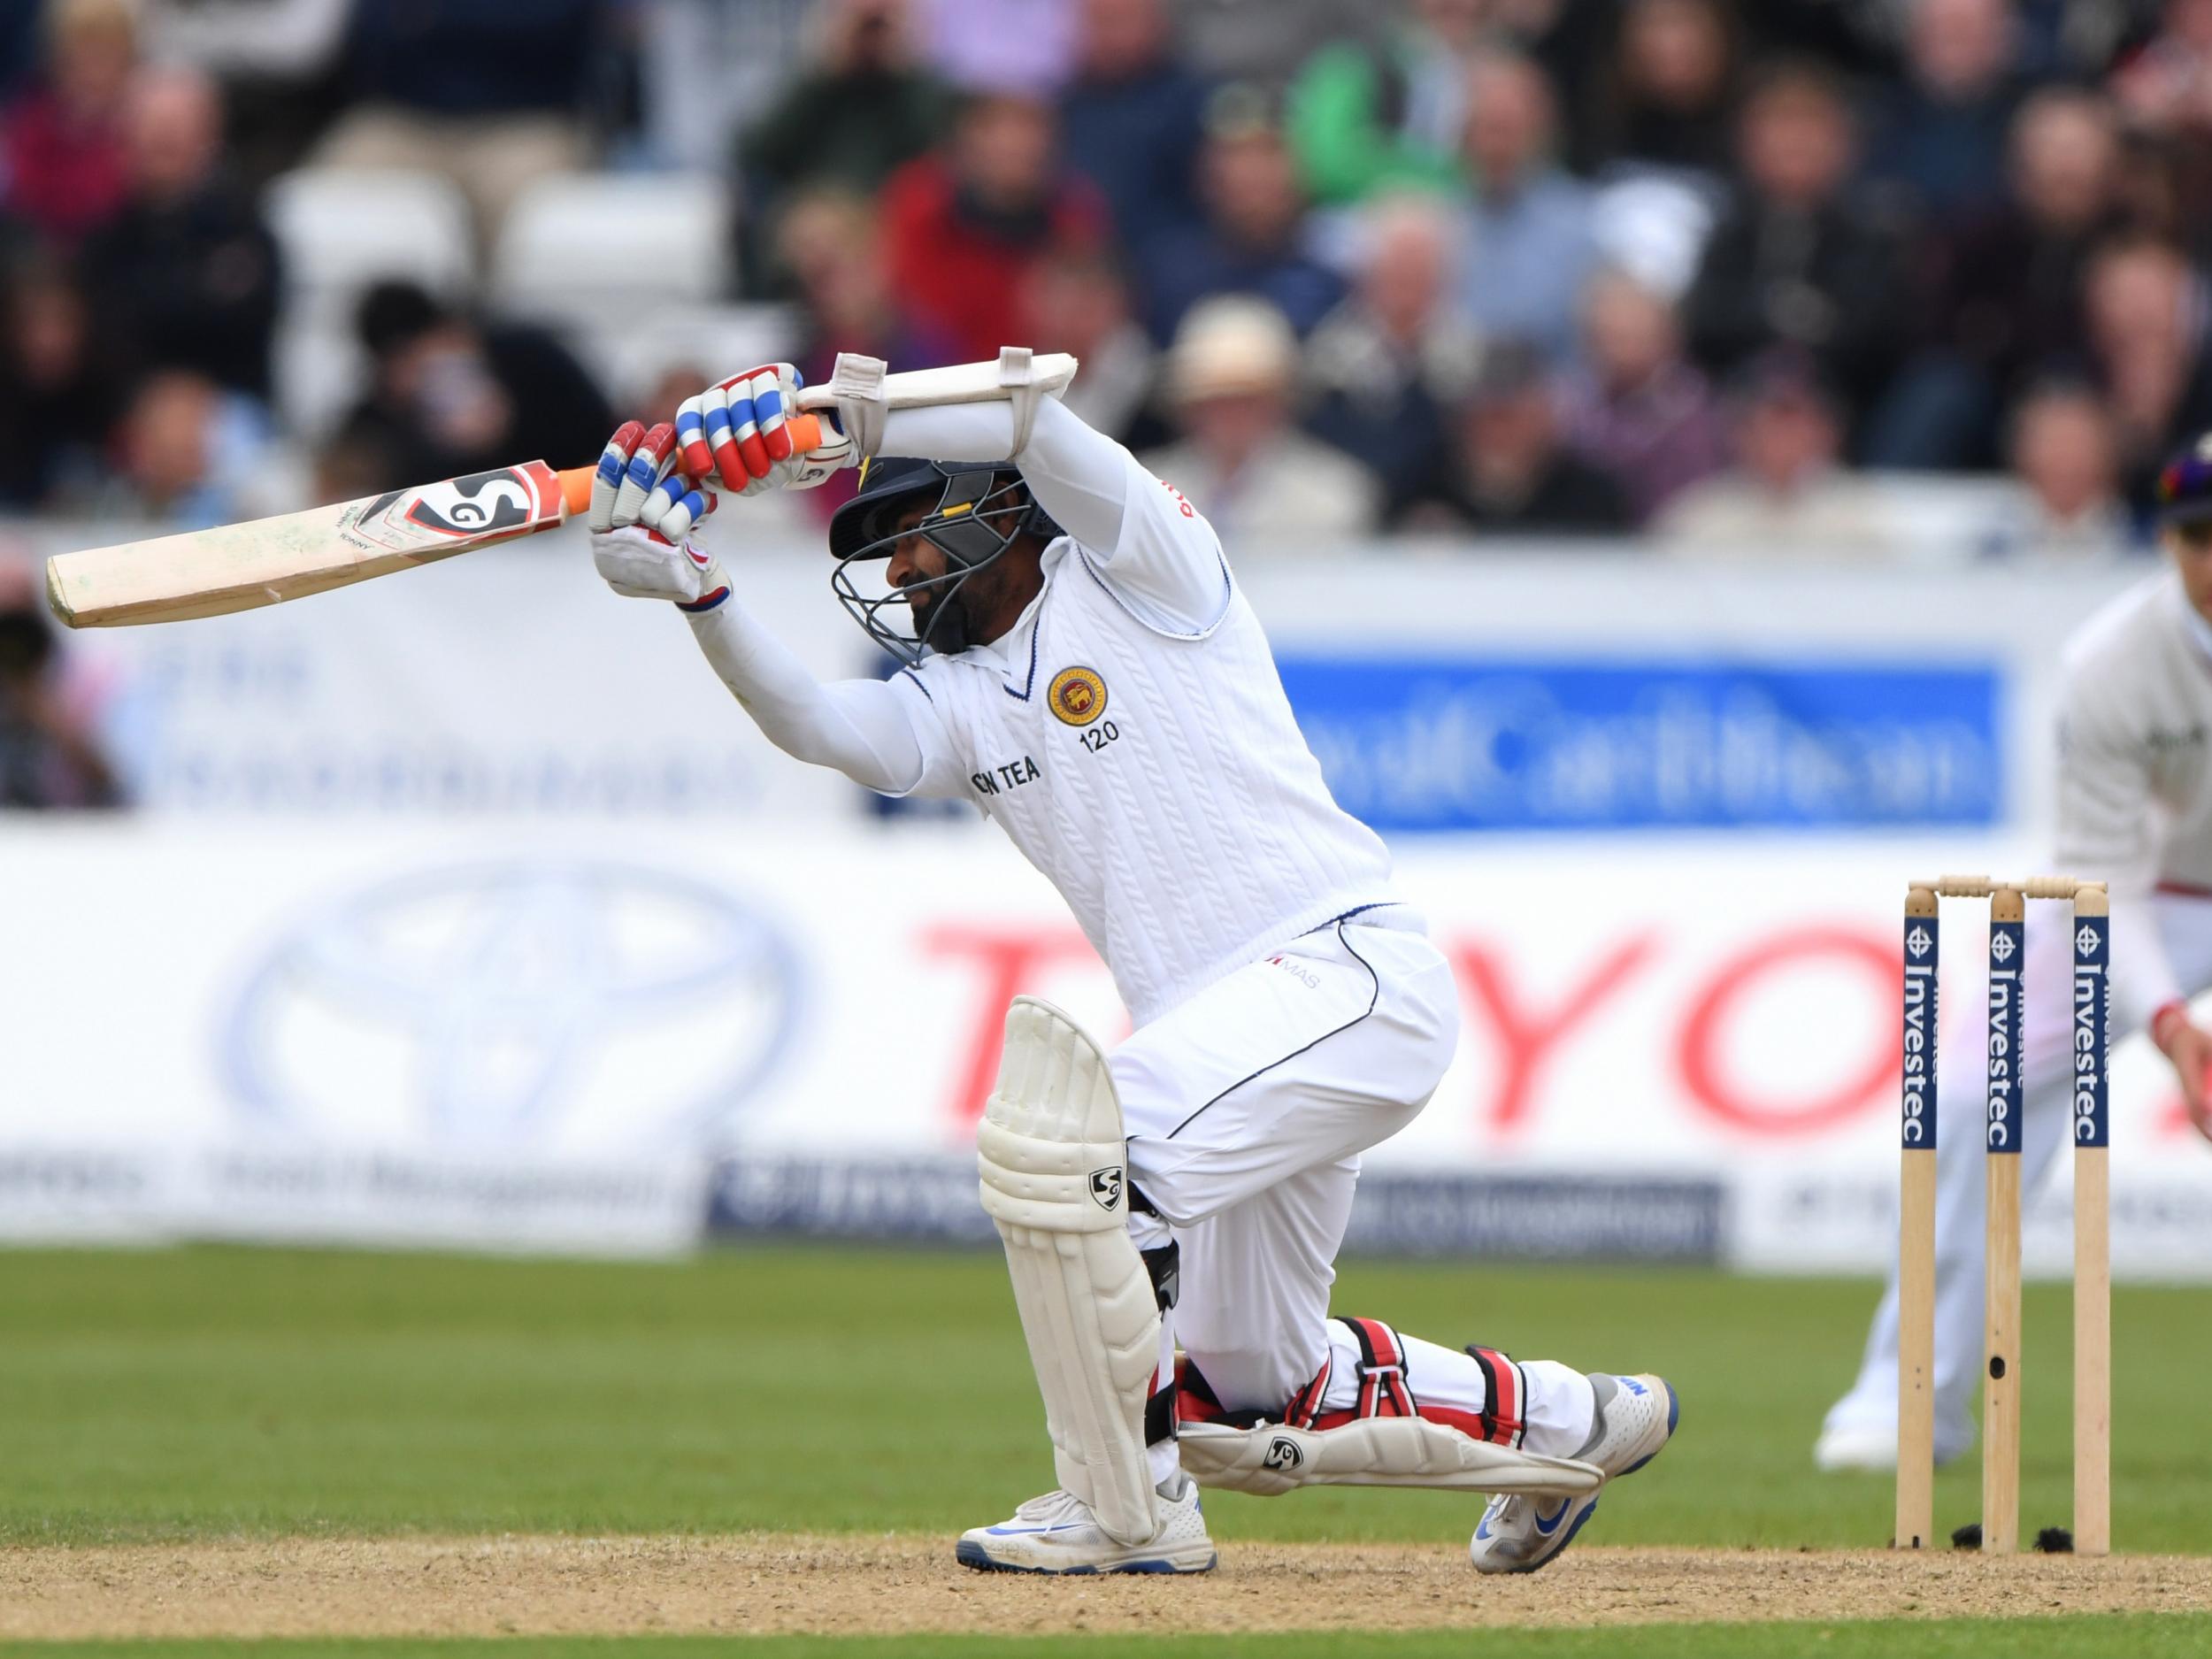 Kaushal Silva was a thorn in England's side